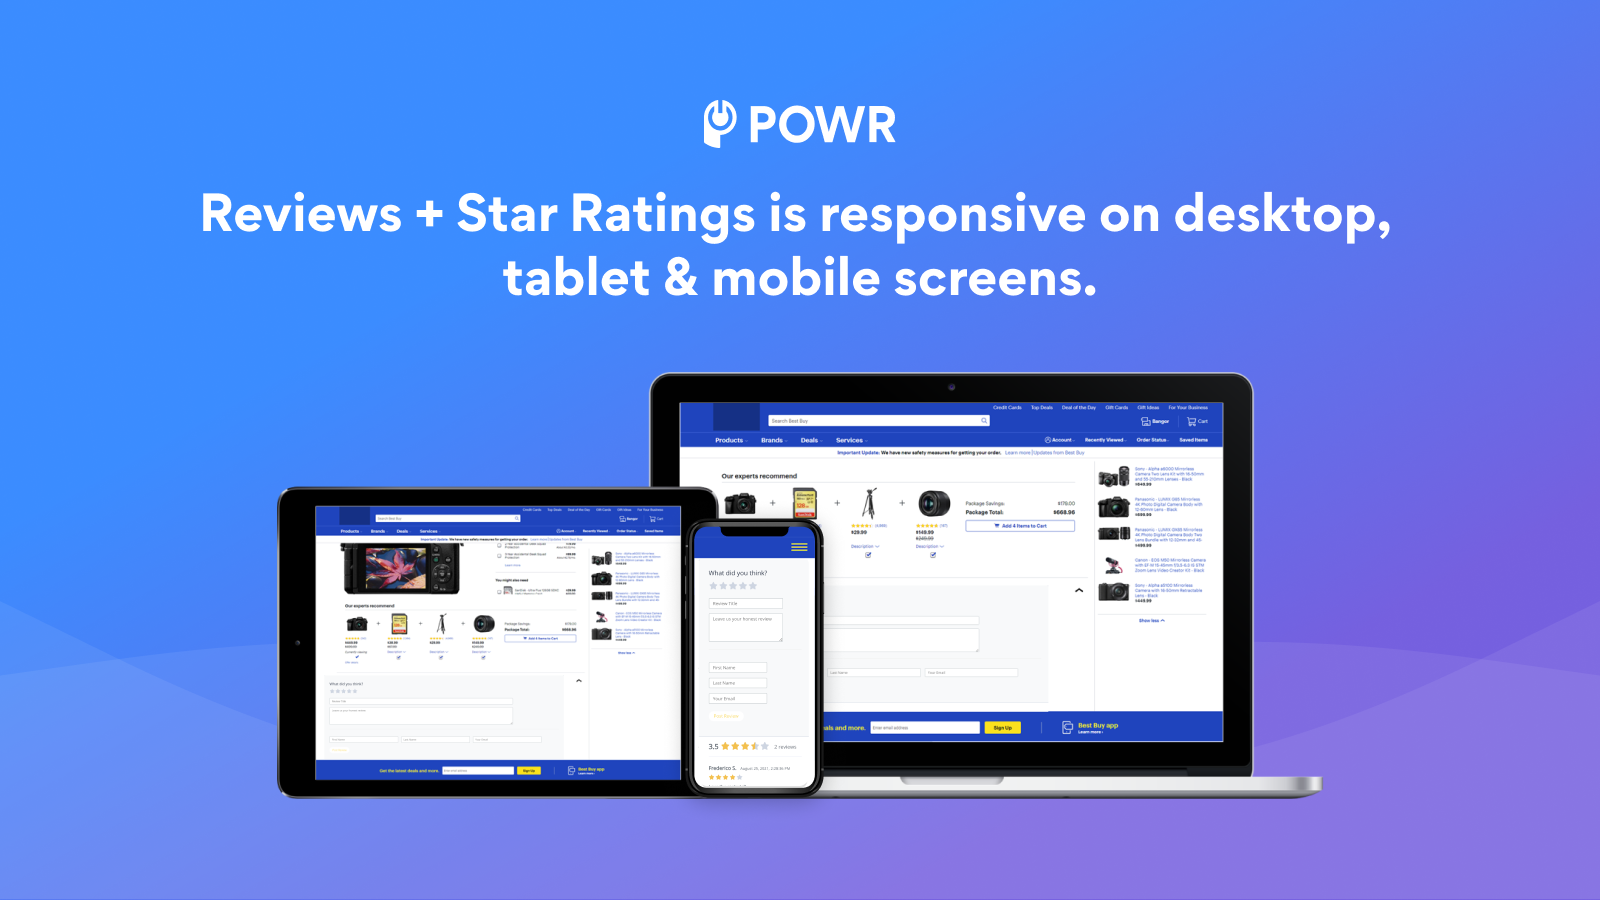 Product reviews are responsive on mobile, desktop and tablet.